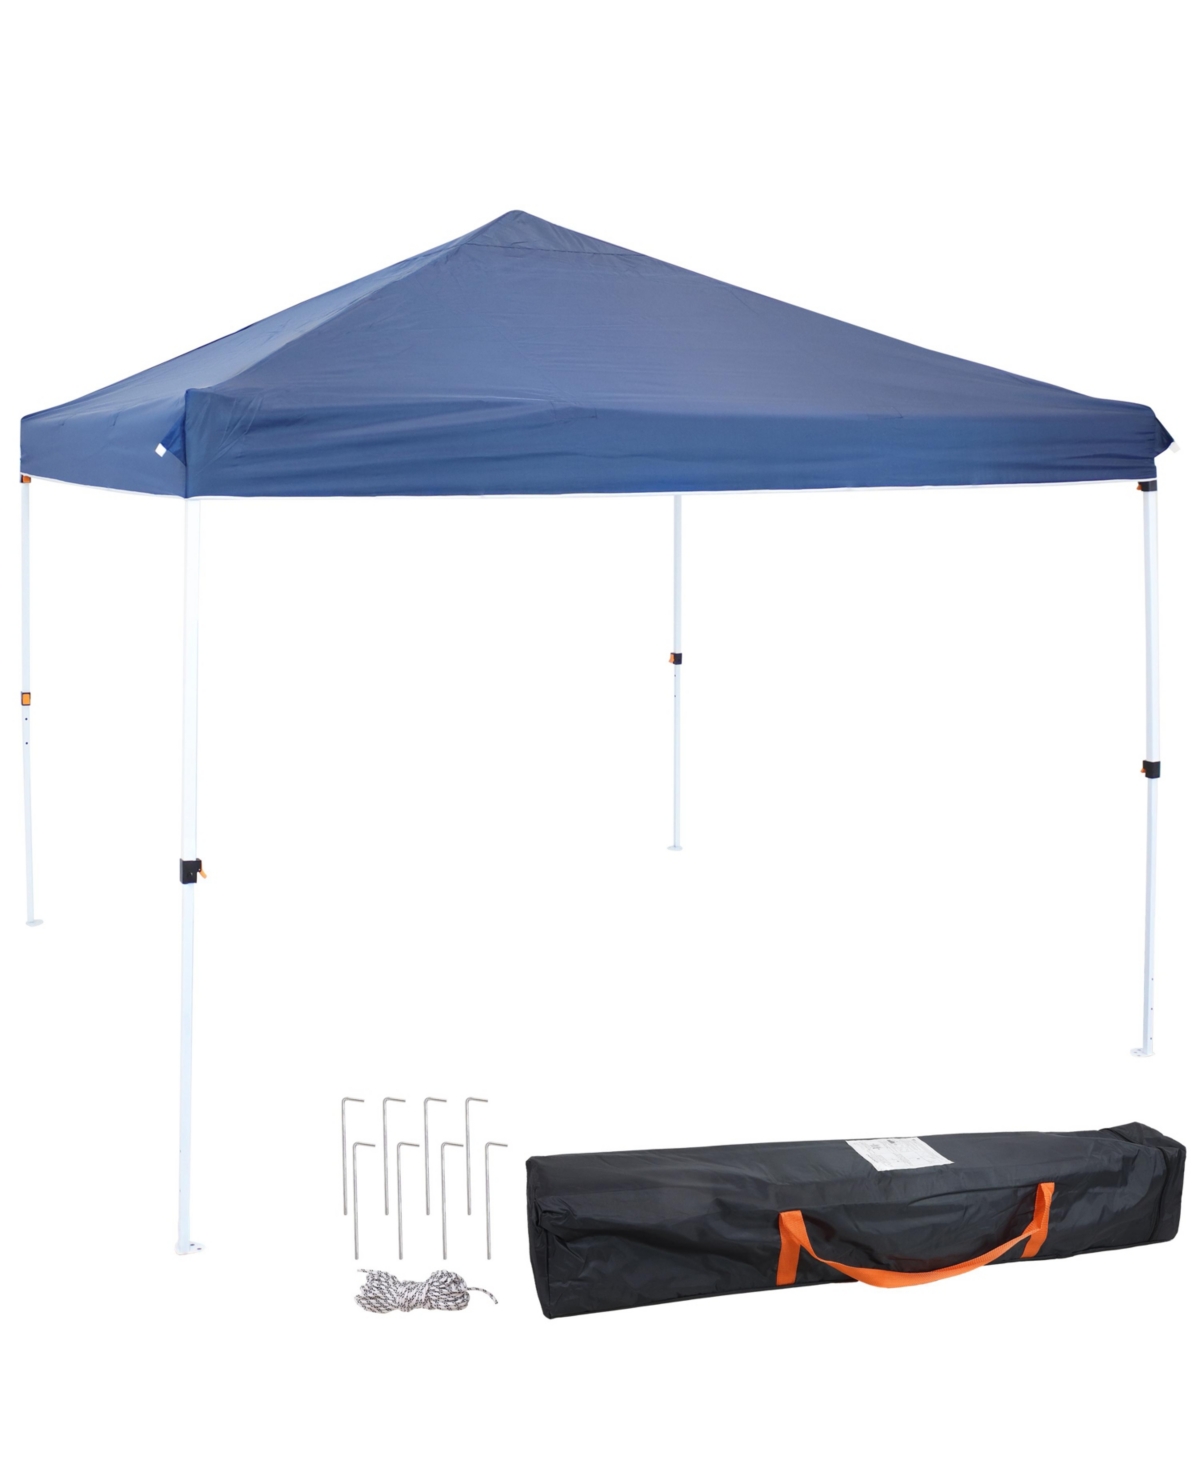 Standard Pop-Up Canopy with Carry Bag - 12 ft x 12 ft - Blue - Blue